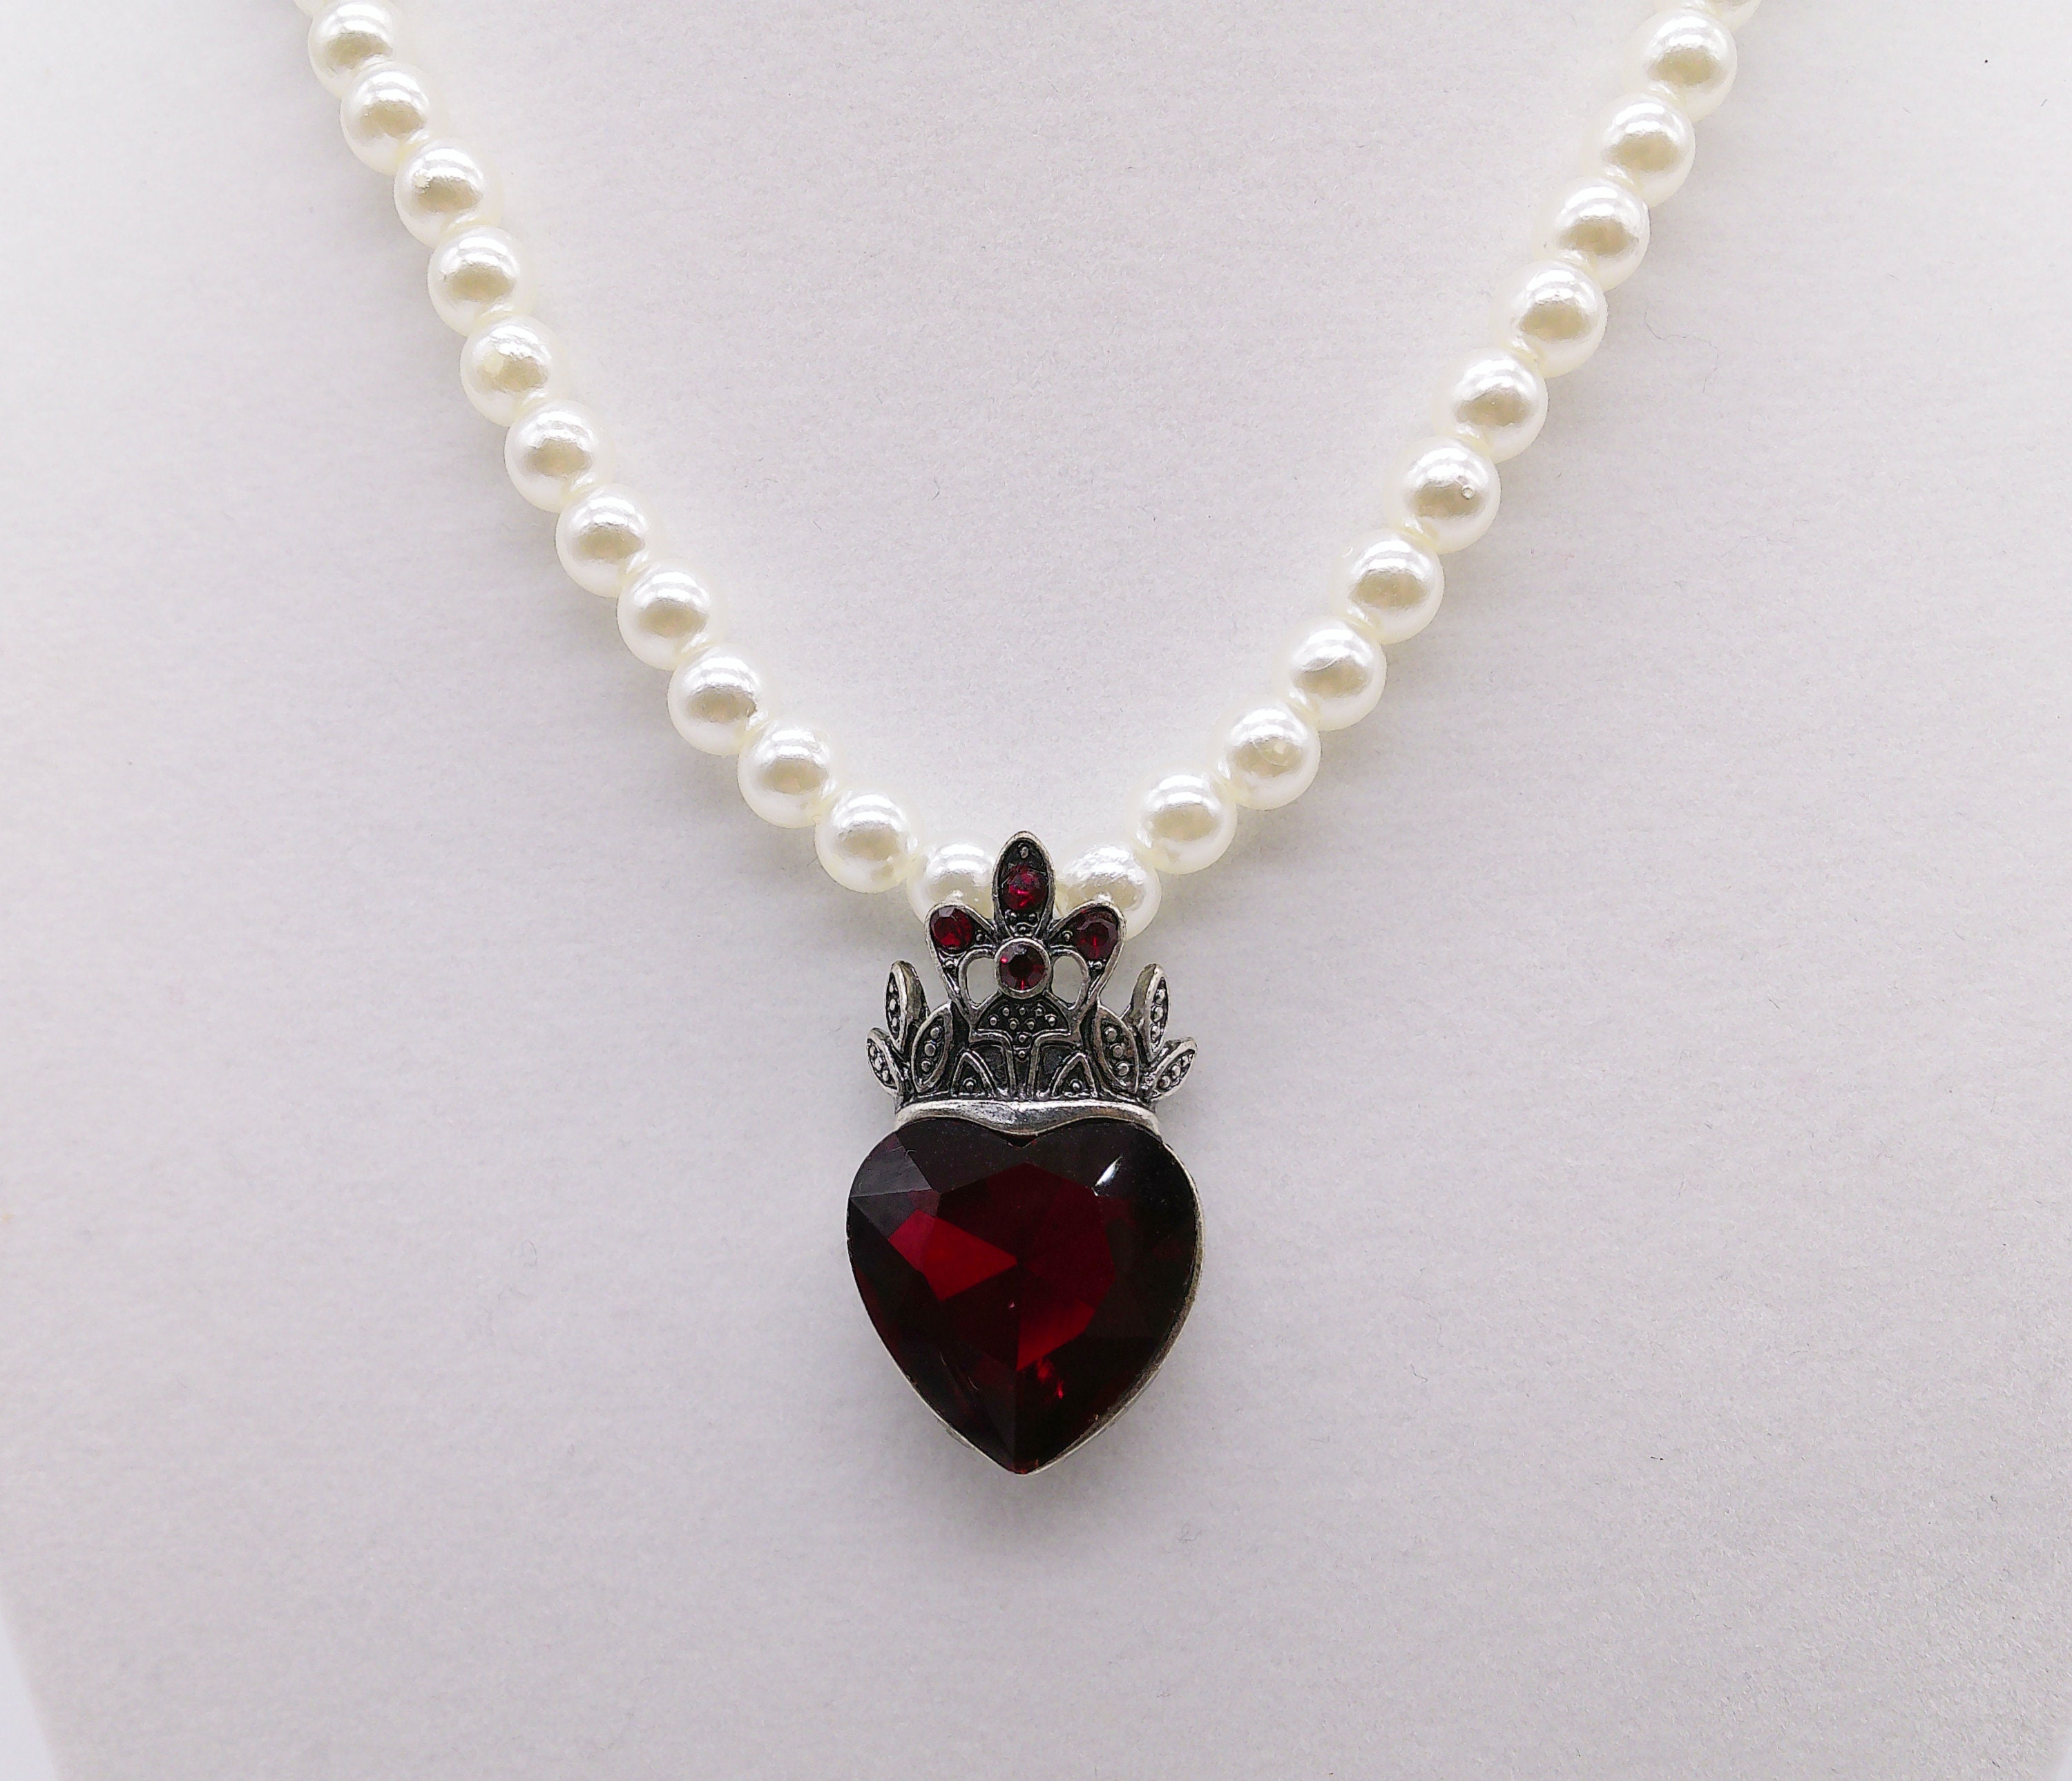 Queen of Hearts Necklace – Posh Way Jewelry